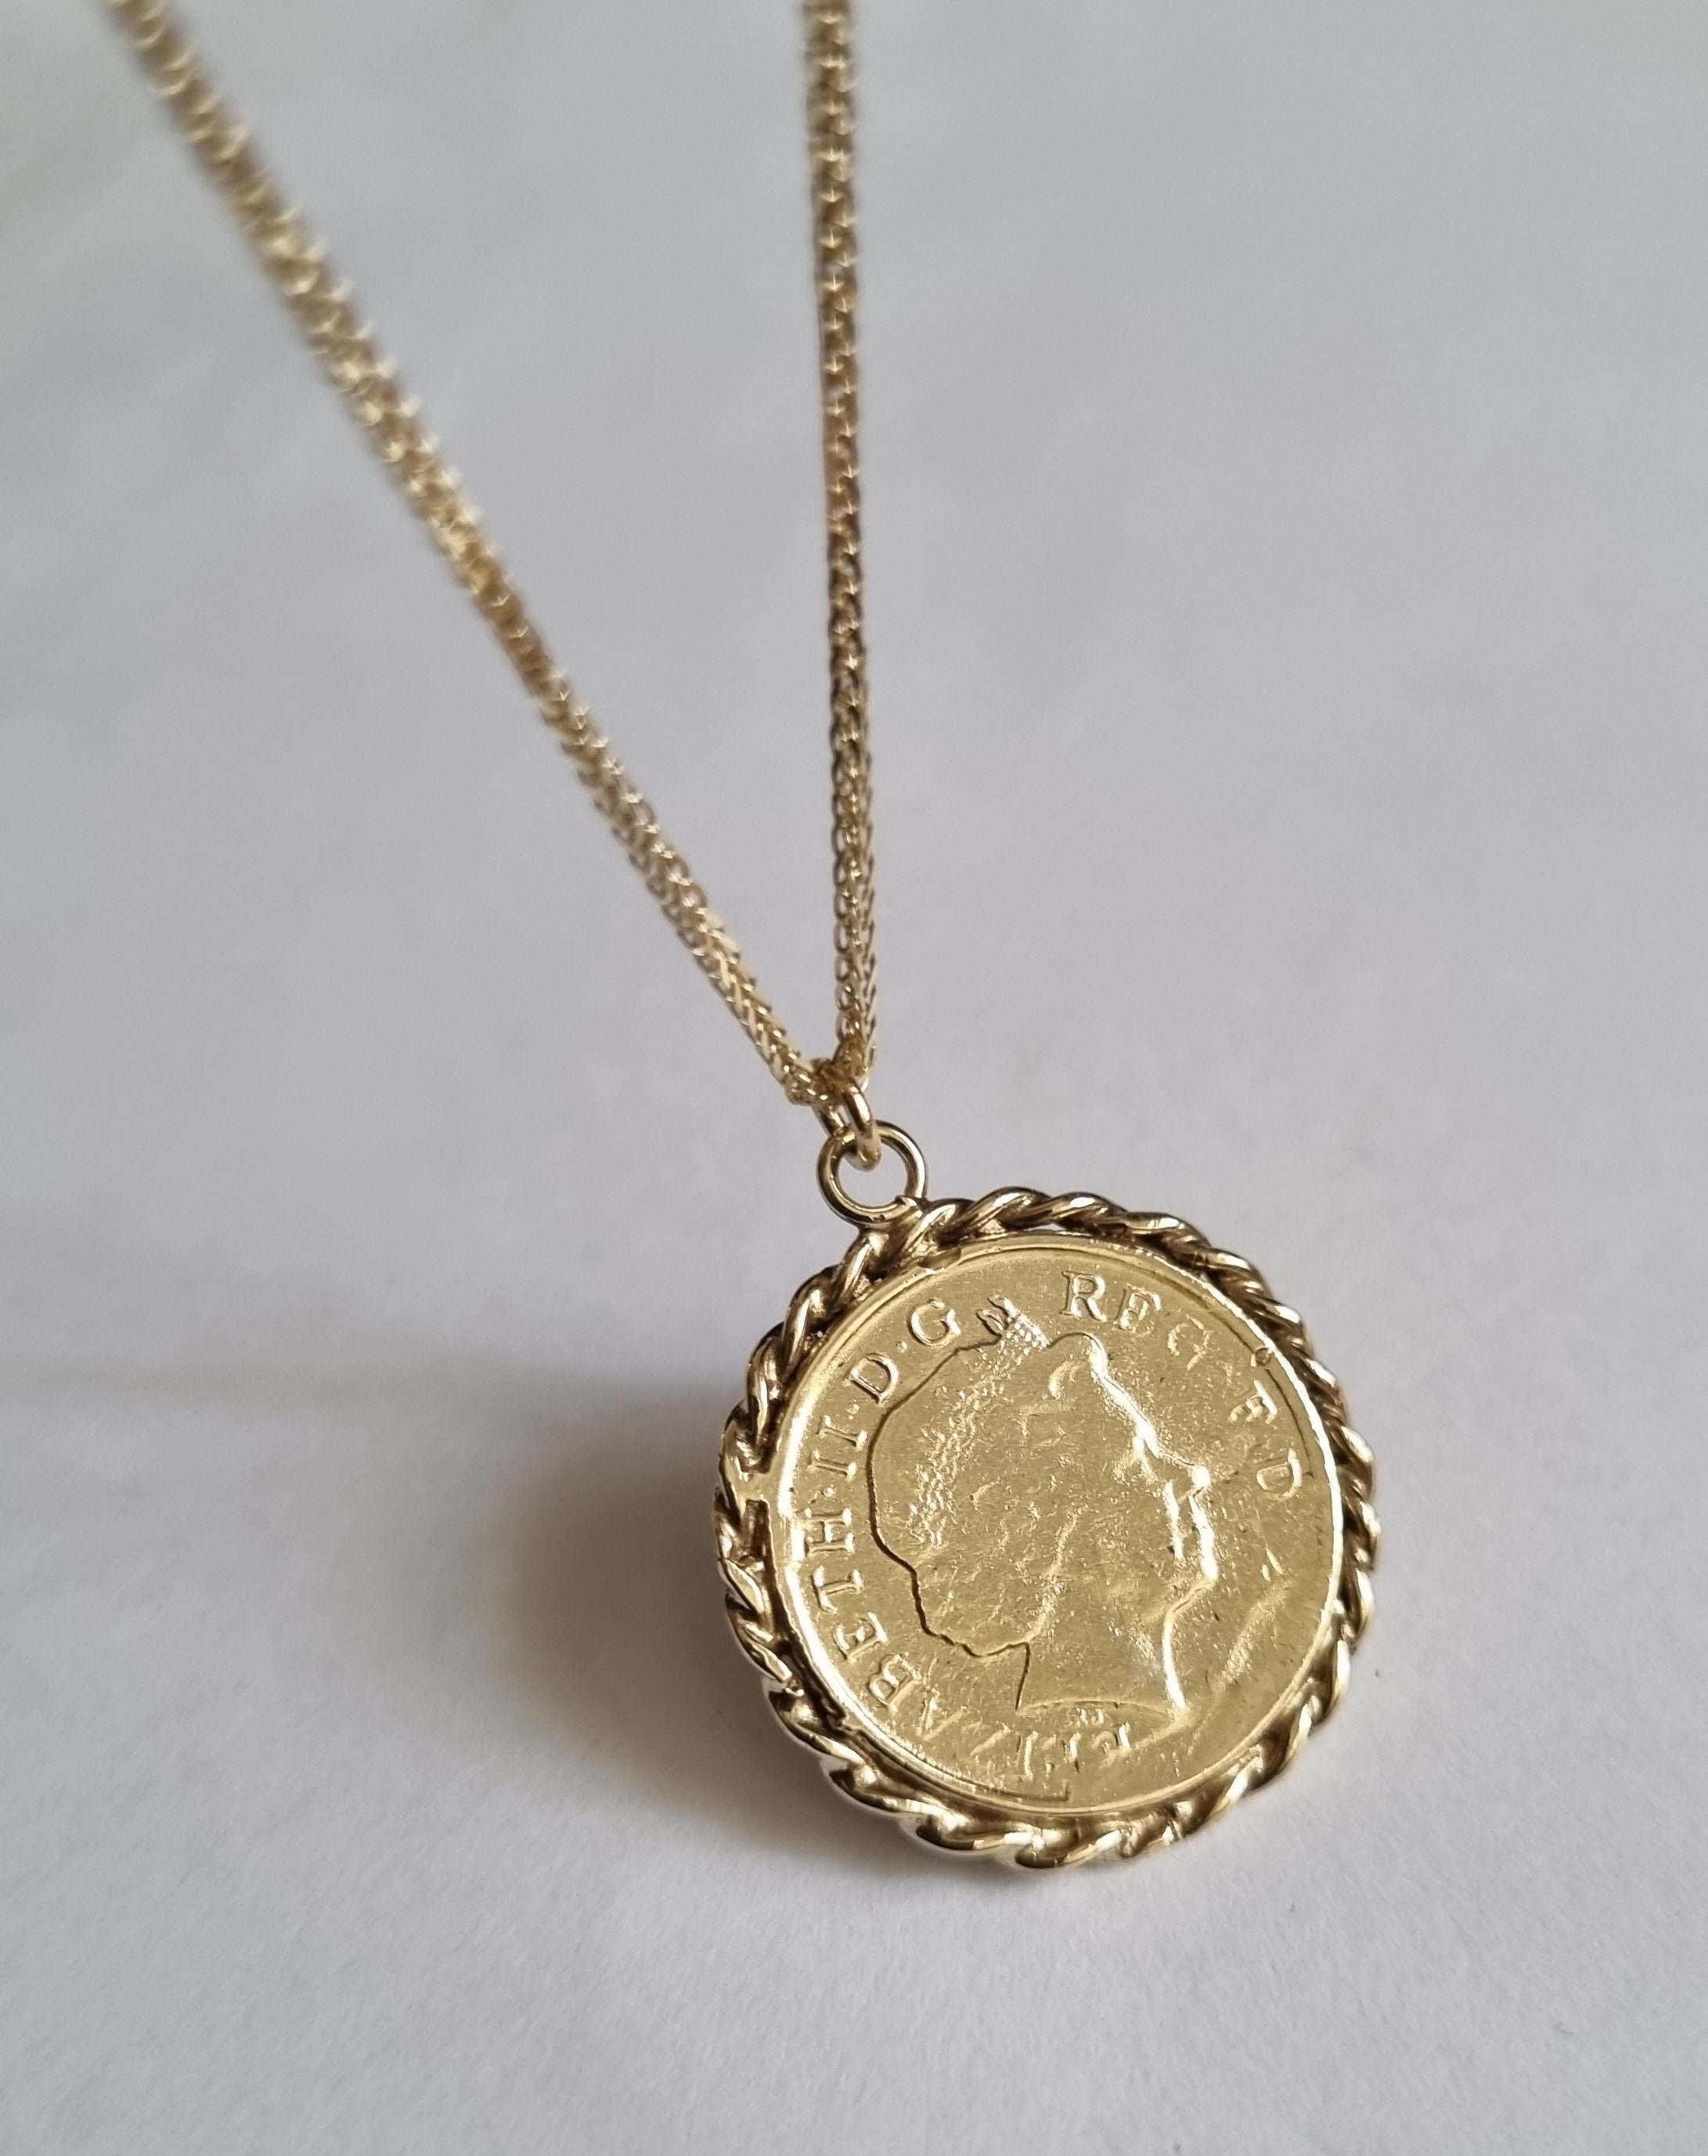 Solid Gold Coin Necklace, 14k Gold Necklace, Gold Coin Pendant